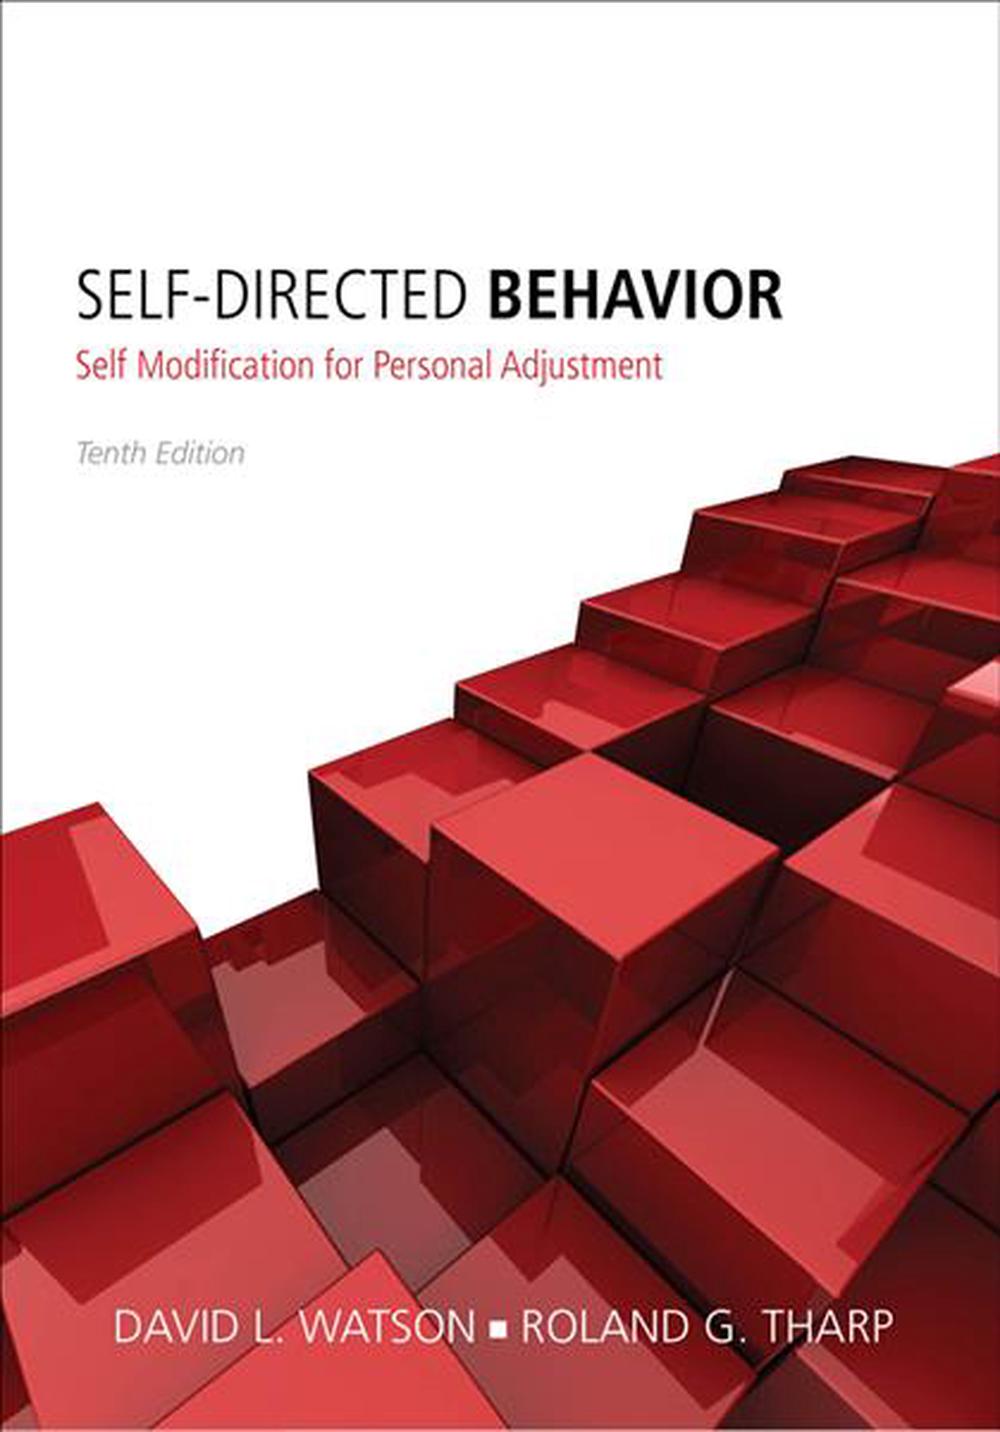 SelfDirected Behavior SelfModification for Personal Adjustment, 10th Edition by David L